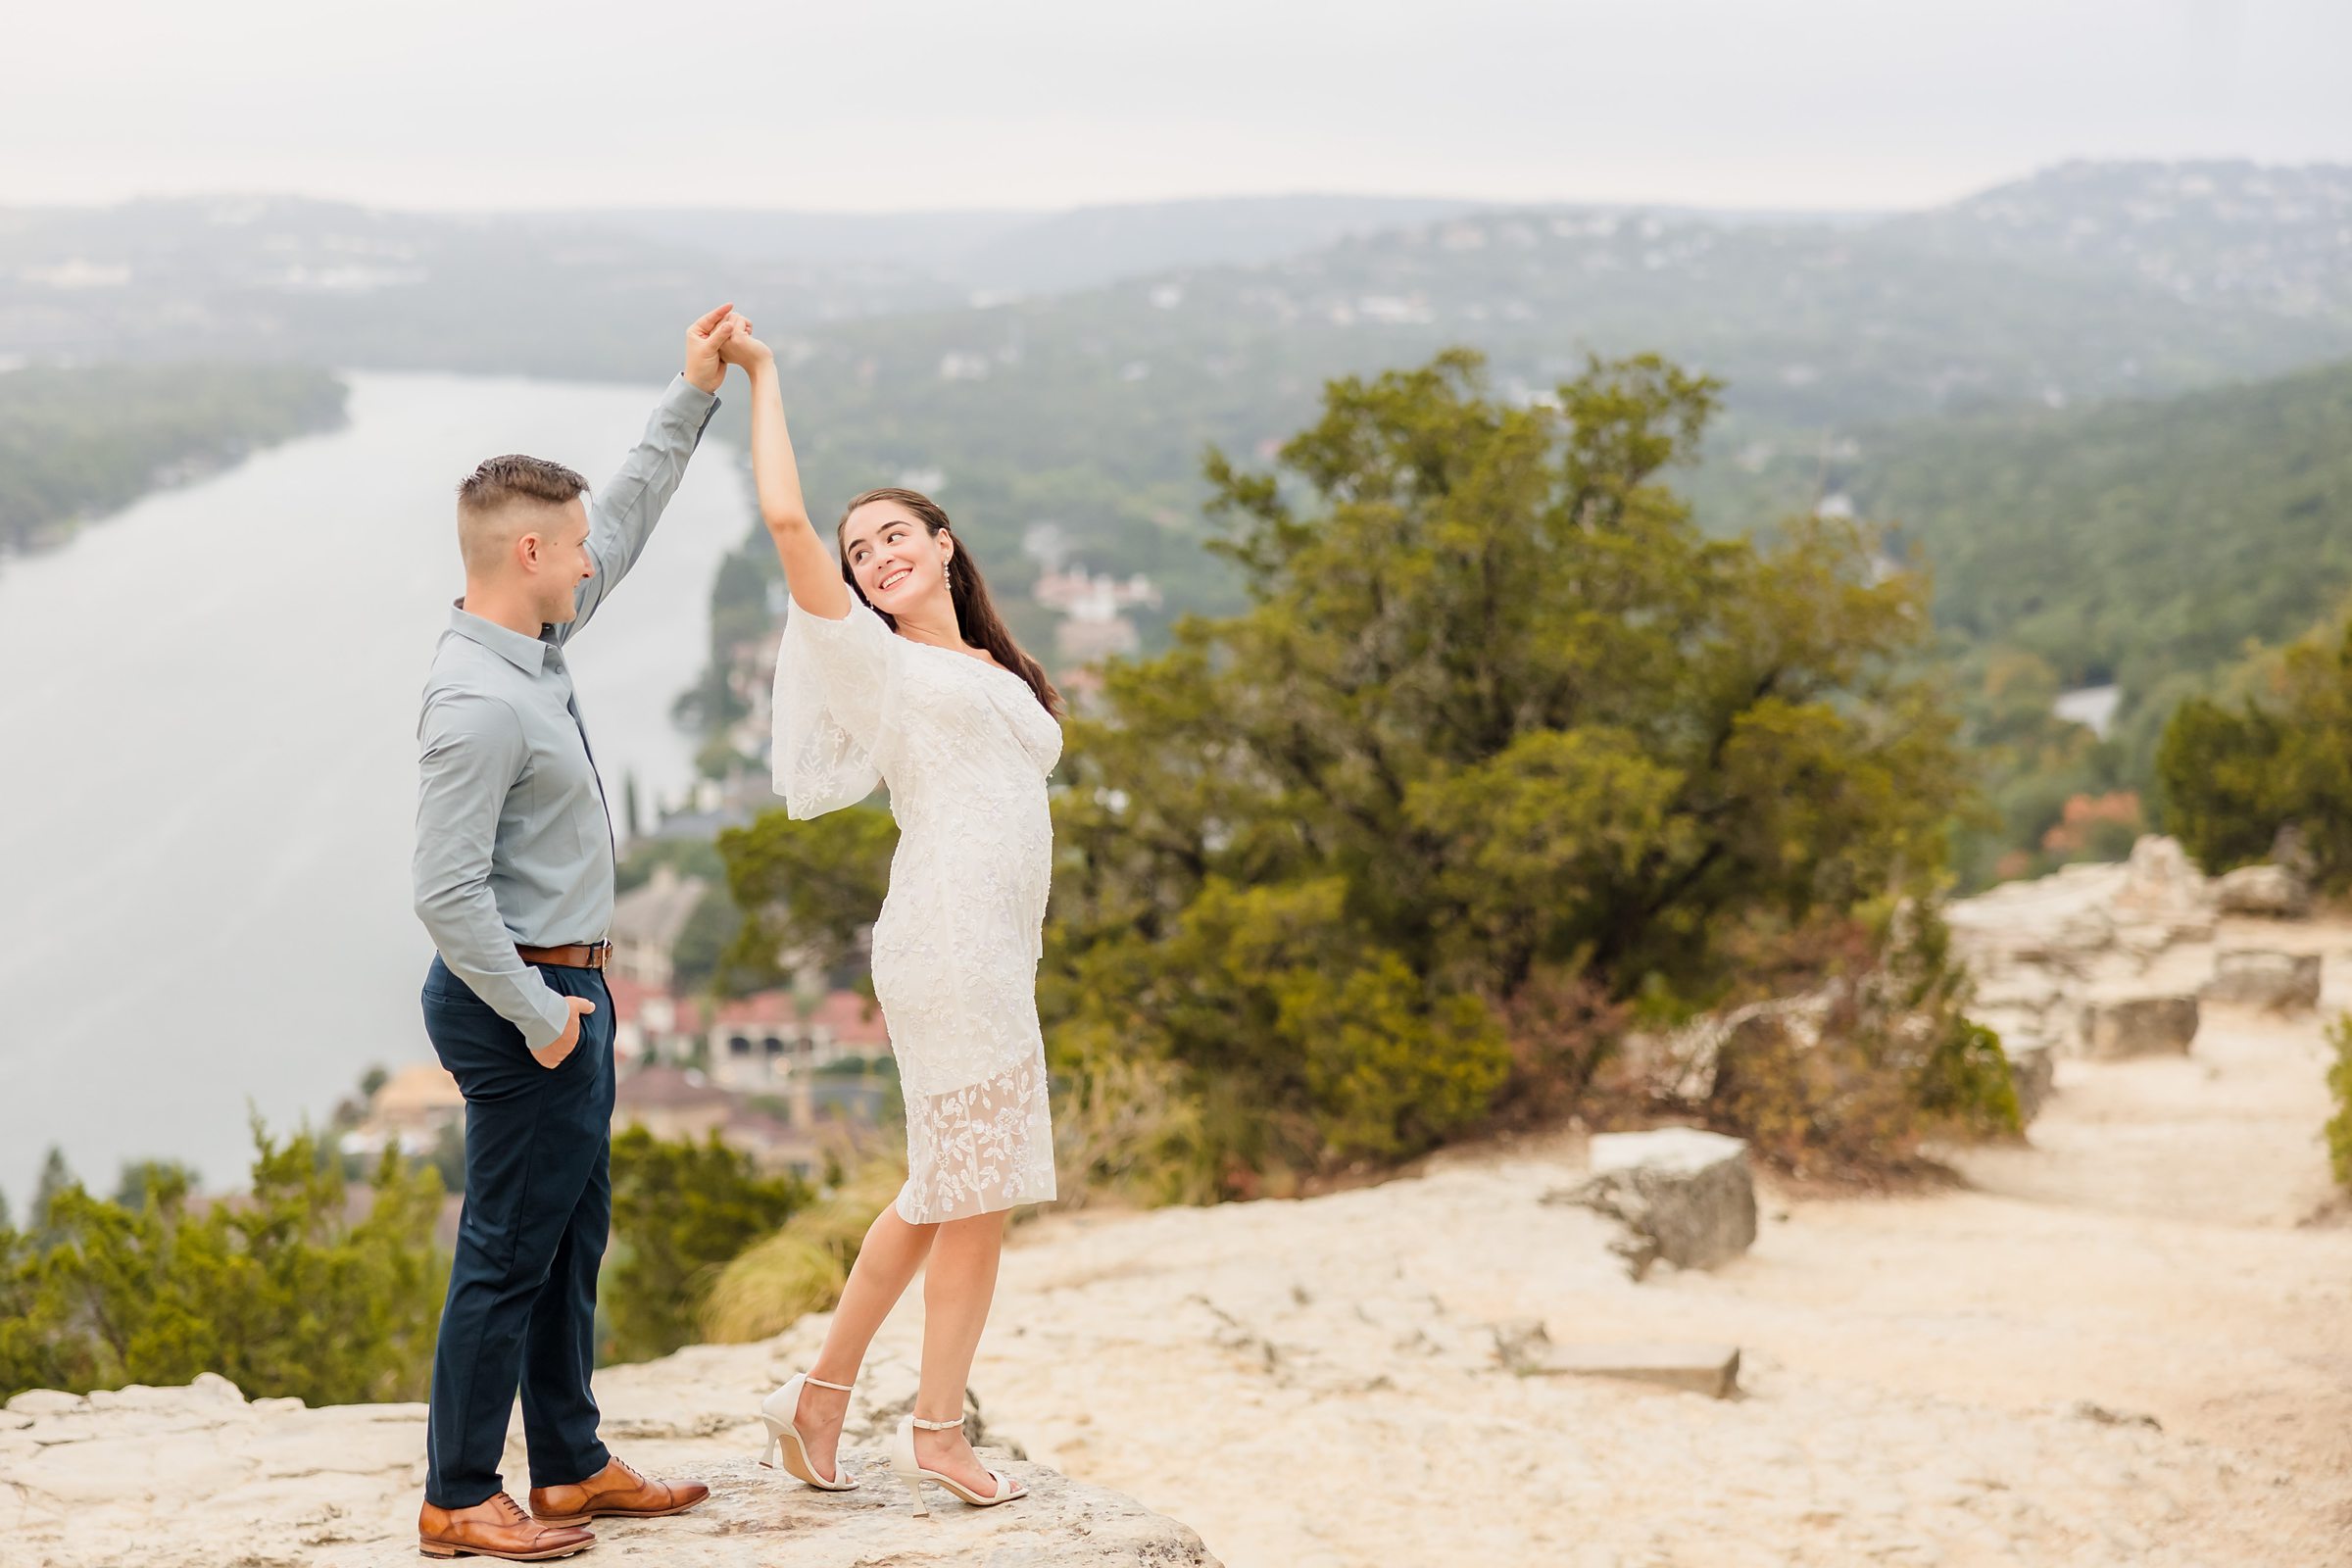 Couple twirl together during their engagement session at Mount Bonnell in Austin, Texas.